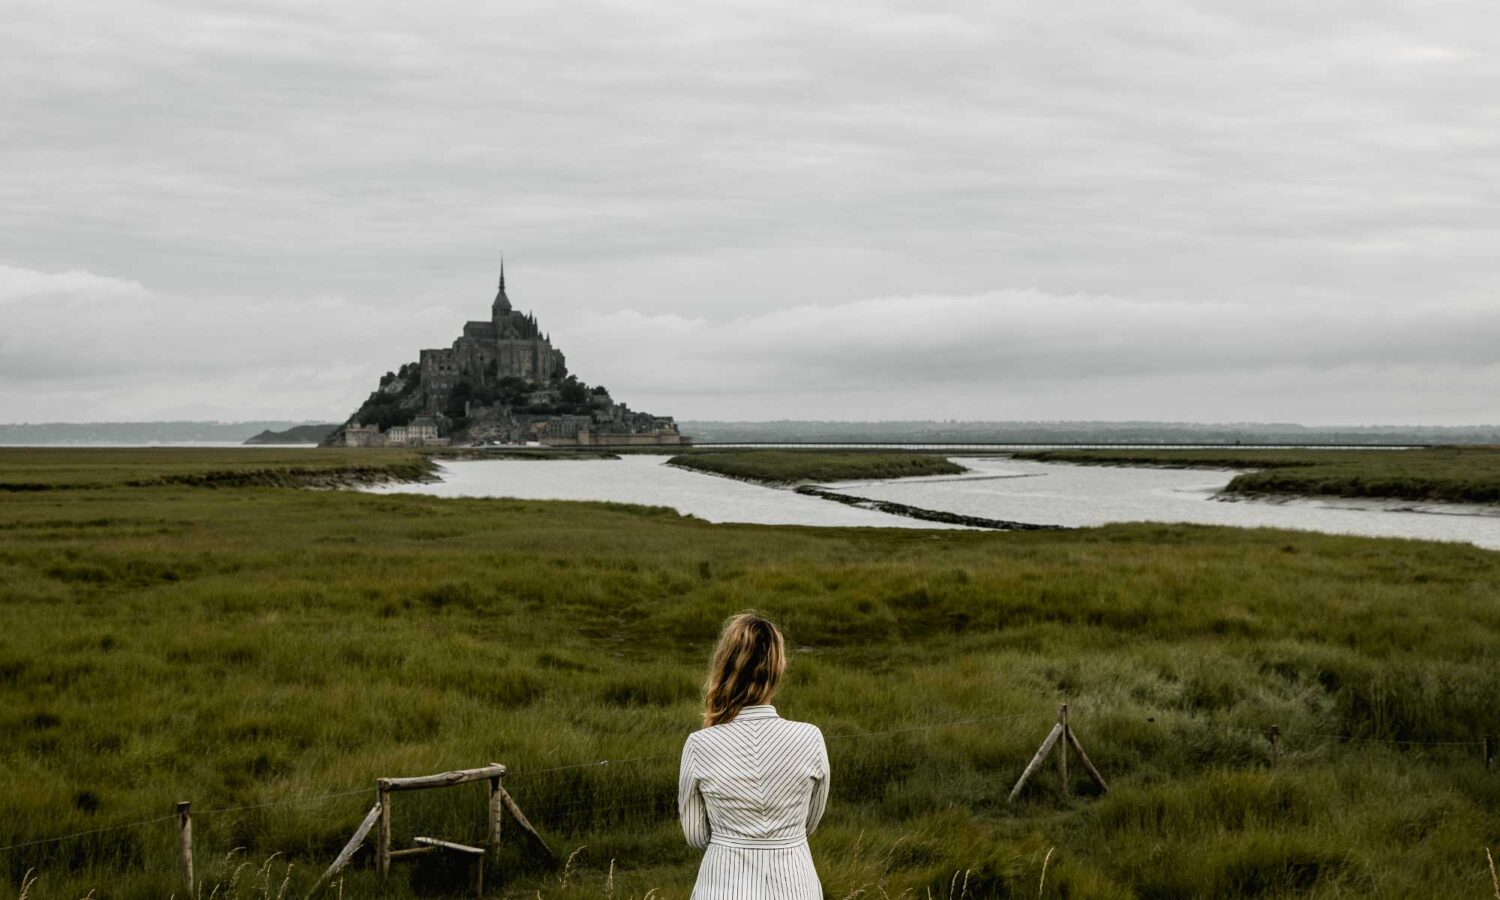 morning views from the meadows around le Mont-St-Michel, France